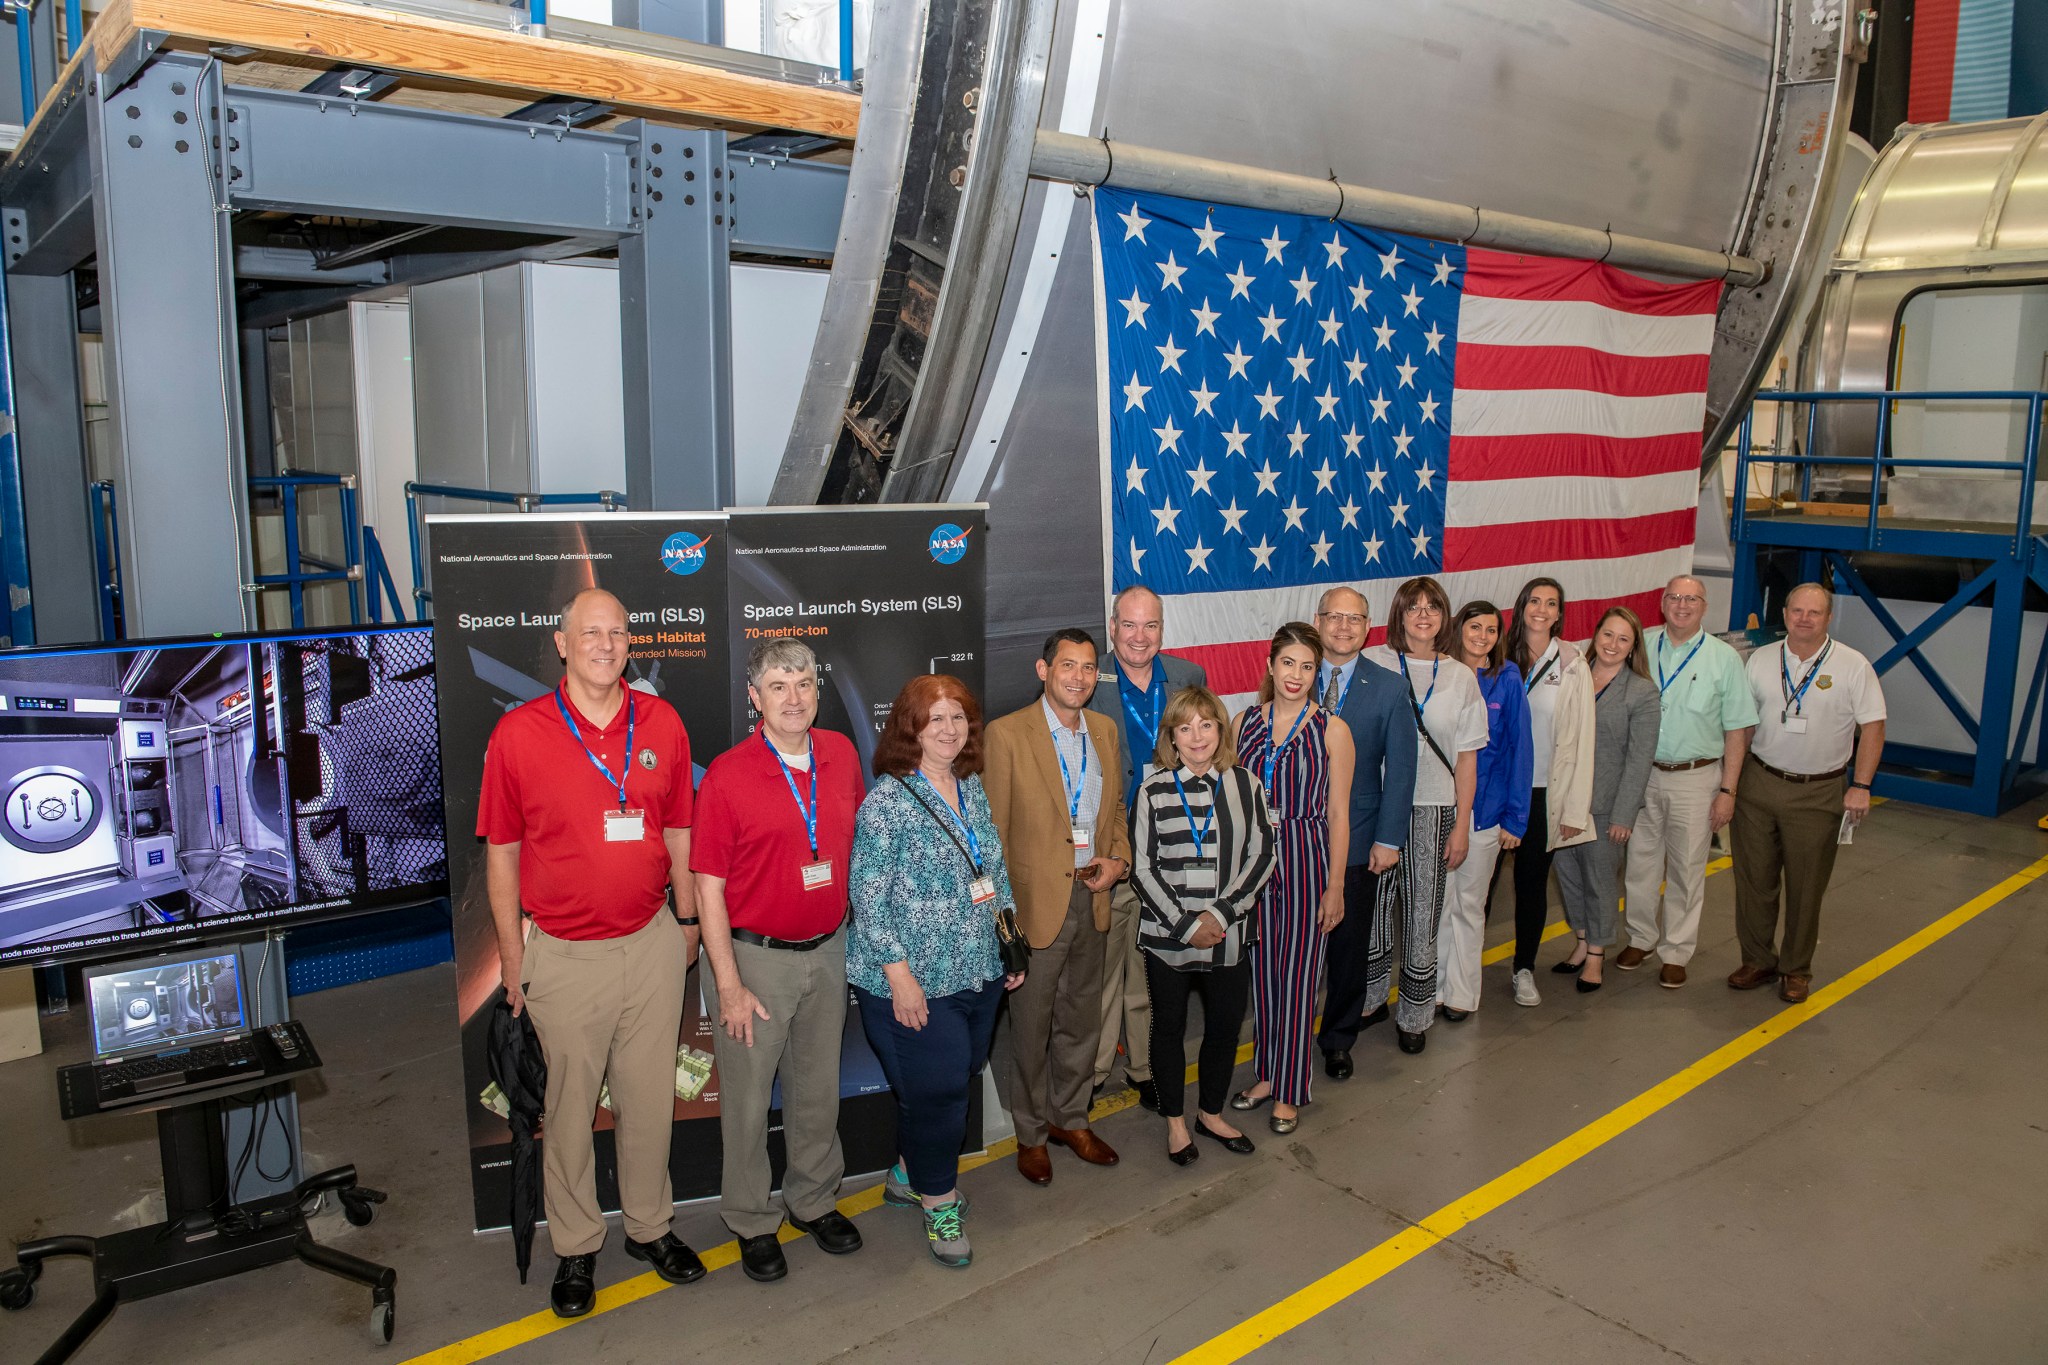 Members of the Aerospace States Association toured NASA’s Marshall Space Flight Center on June 17.